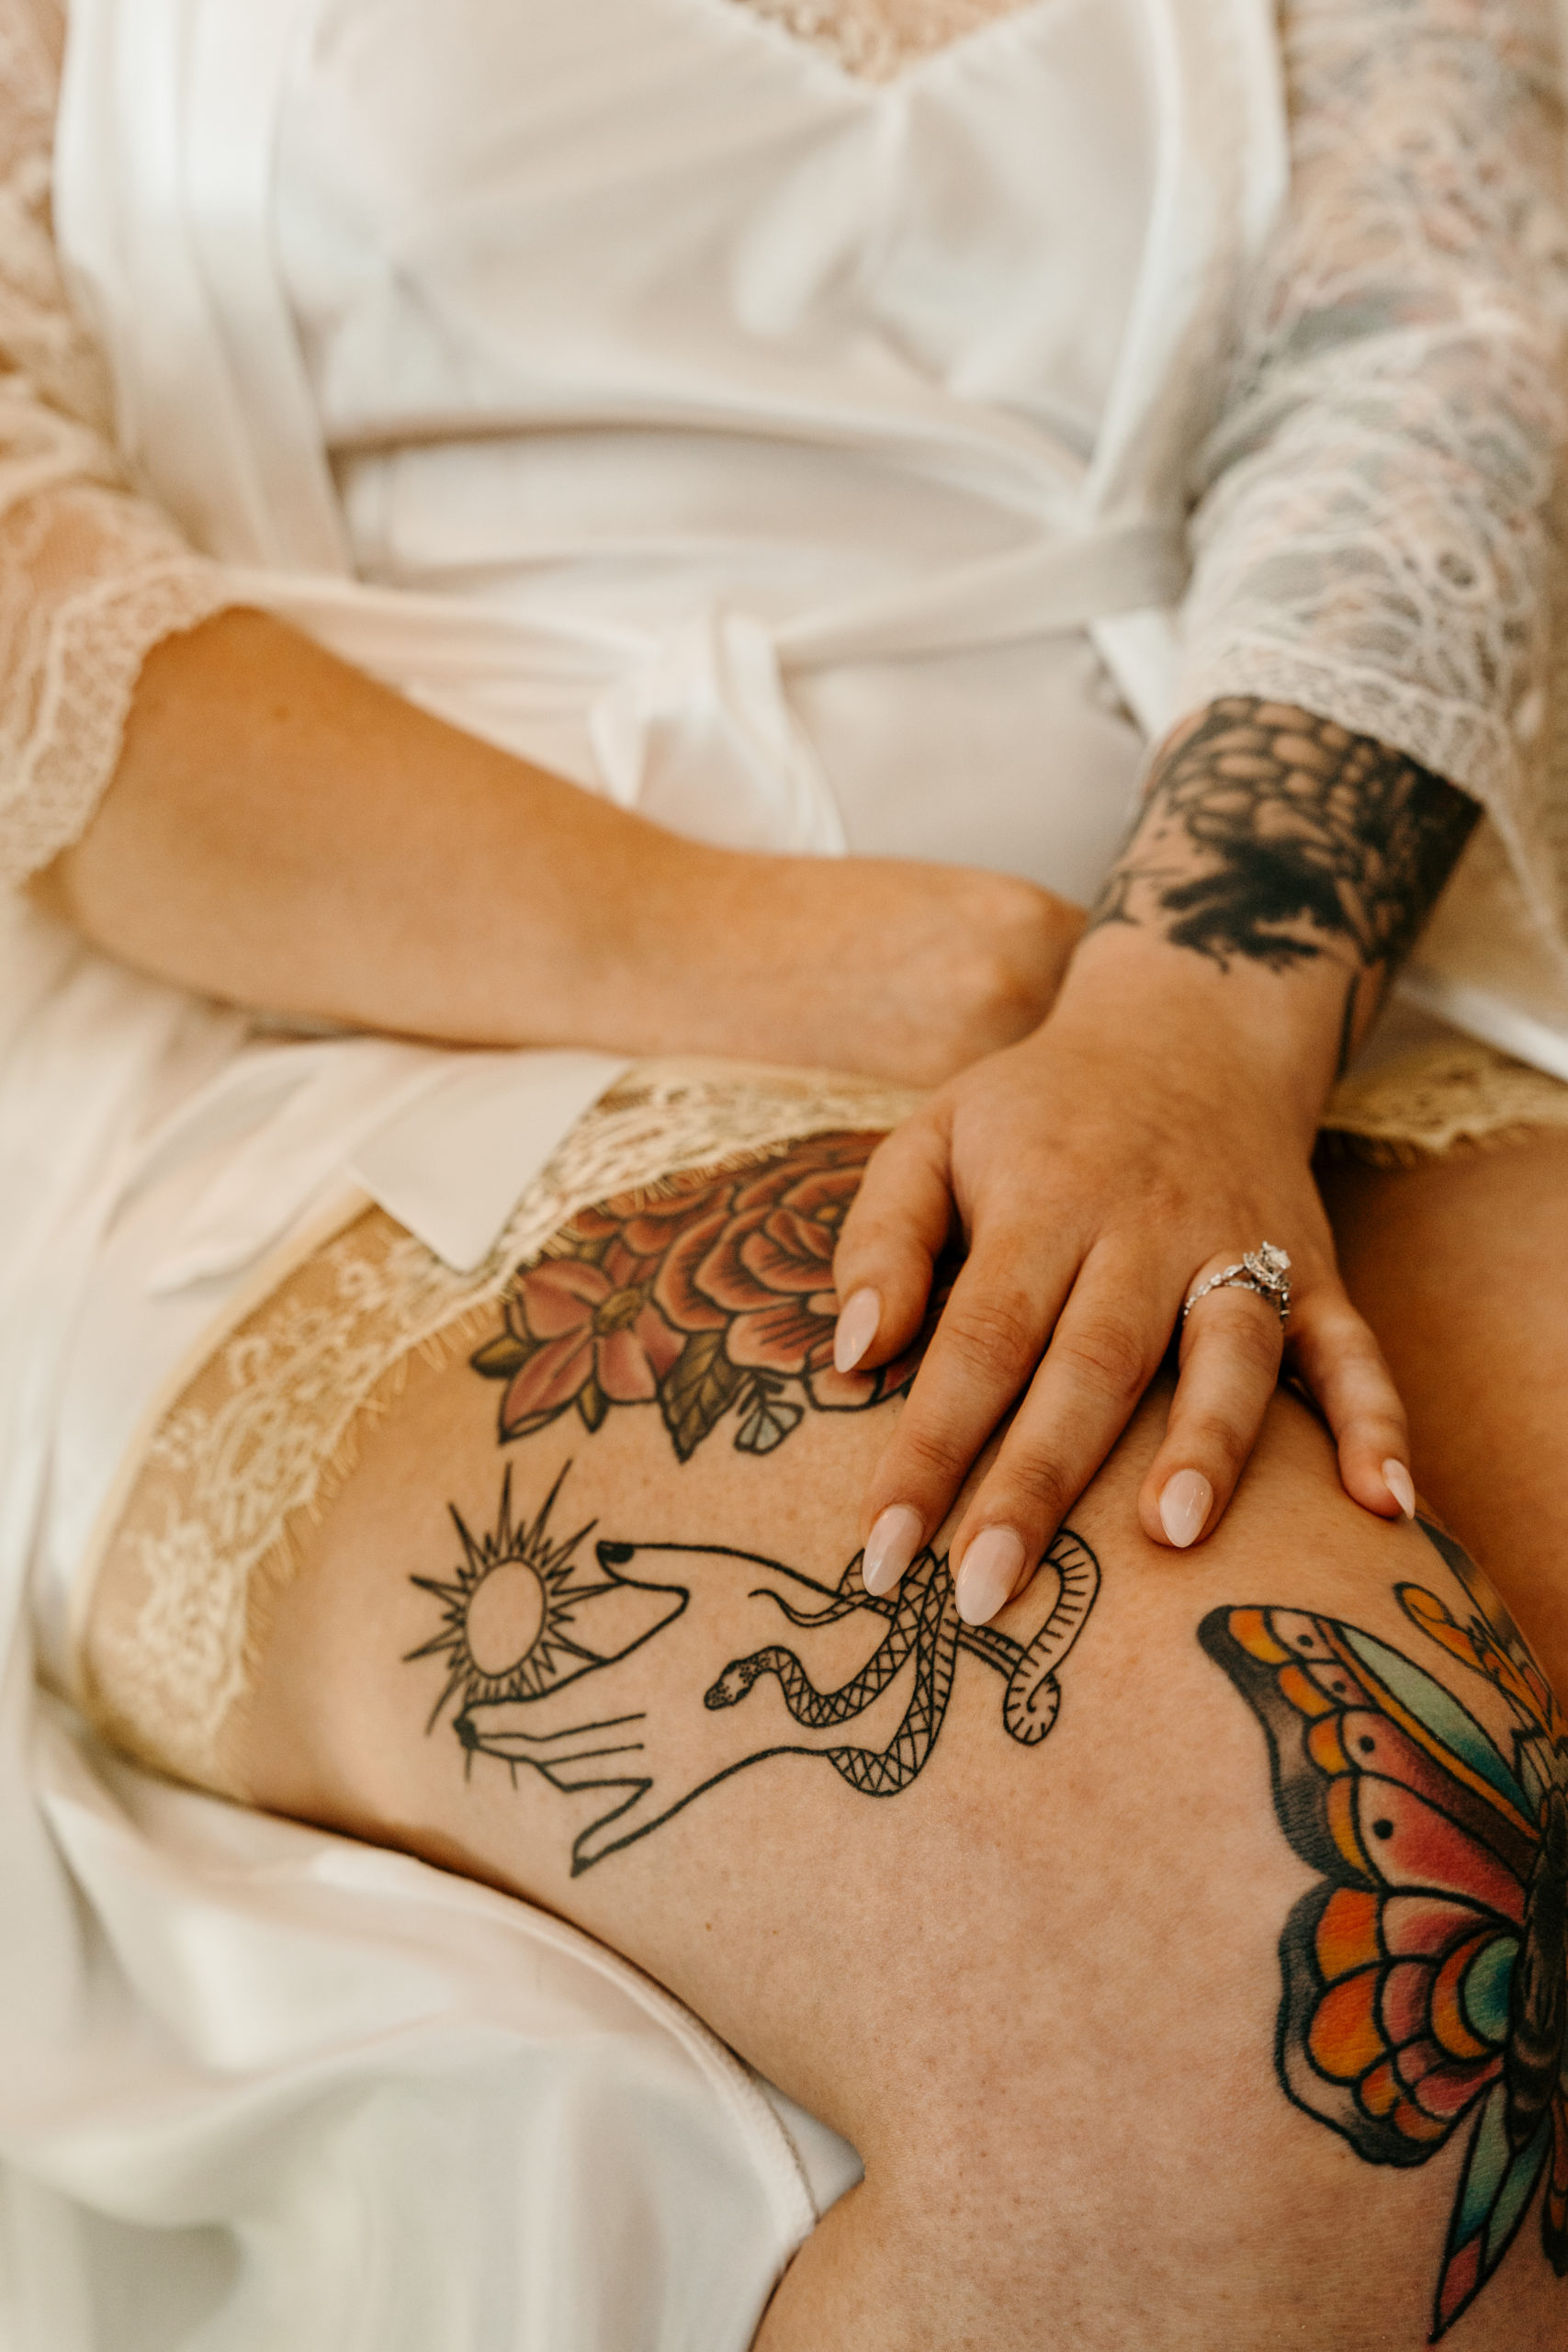 Bride in robe getting ready with her hand on tattooed leg showing engagement ring and manicure 